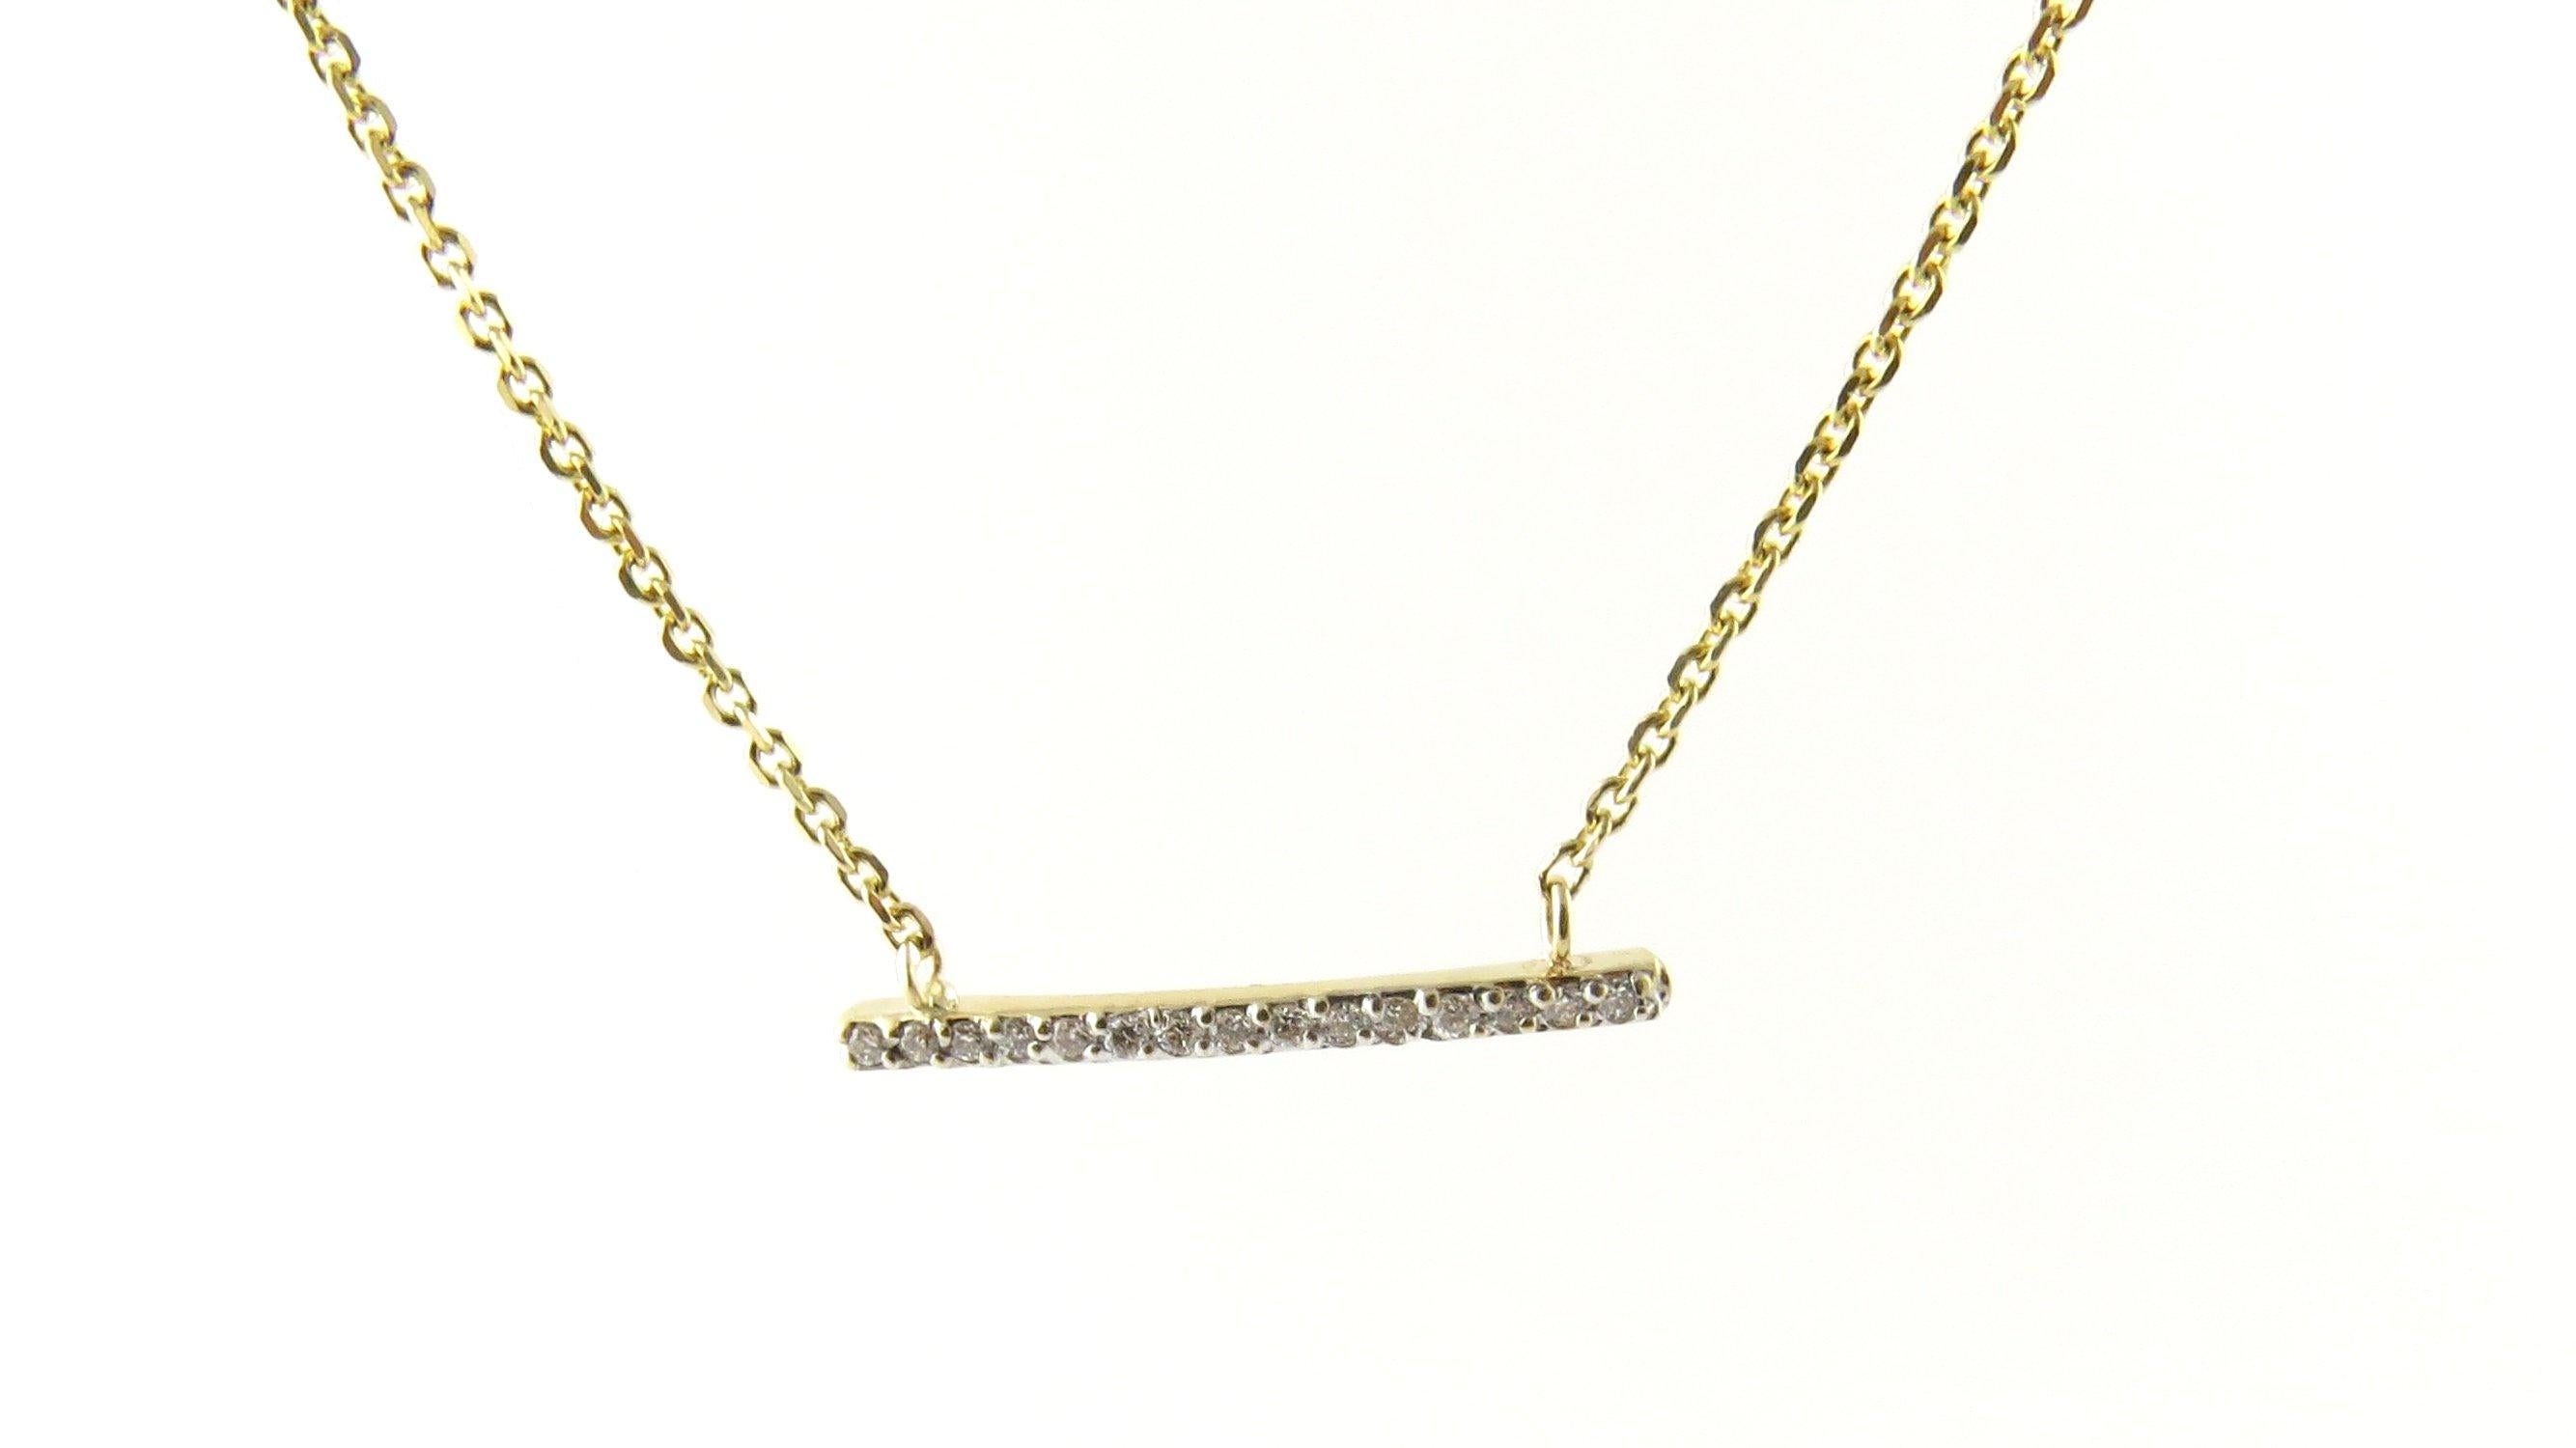 Vintage 14 Karat Yellow Gold Diamond Bar Necklace. This sparkling necklace features a gracefully curved diamond bar (23 mm) adorned with round brilliant cut diamonds on a 16.5 inch yellow gold necklace.
Approximate total diamond weight: .15 ct.